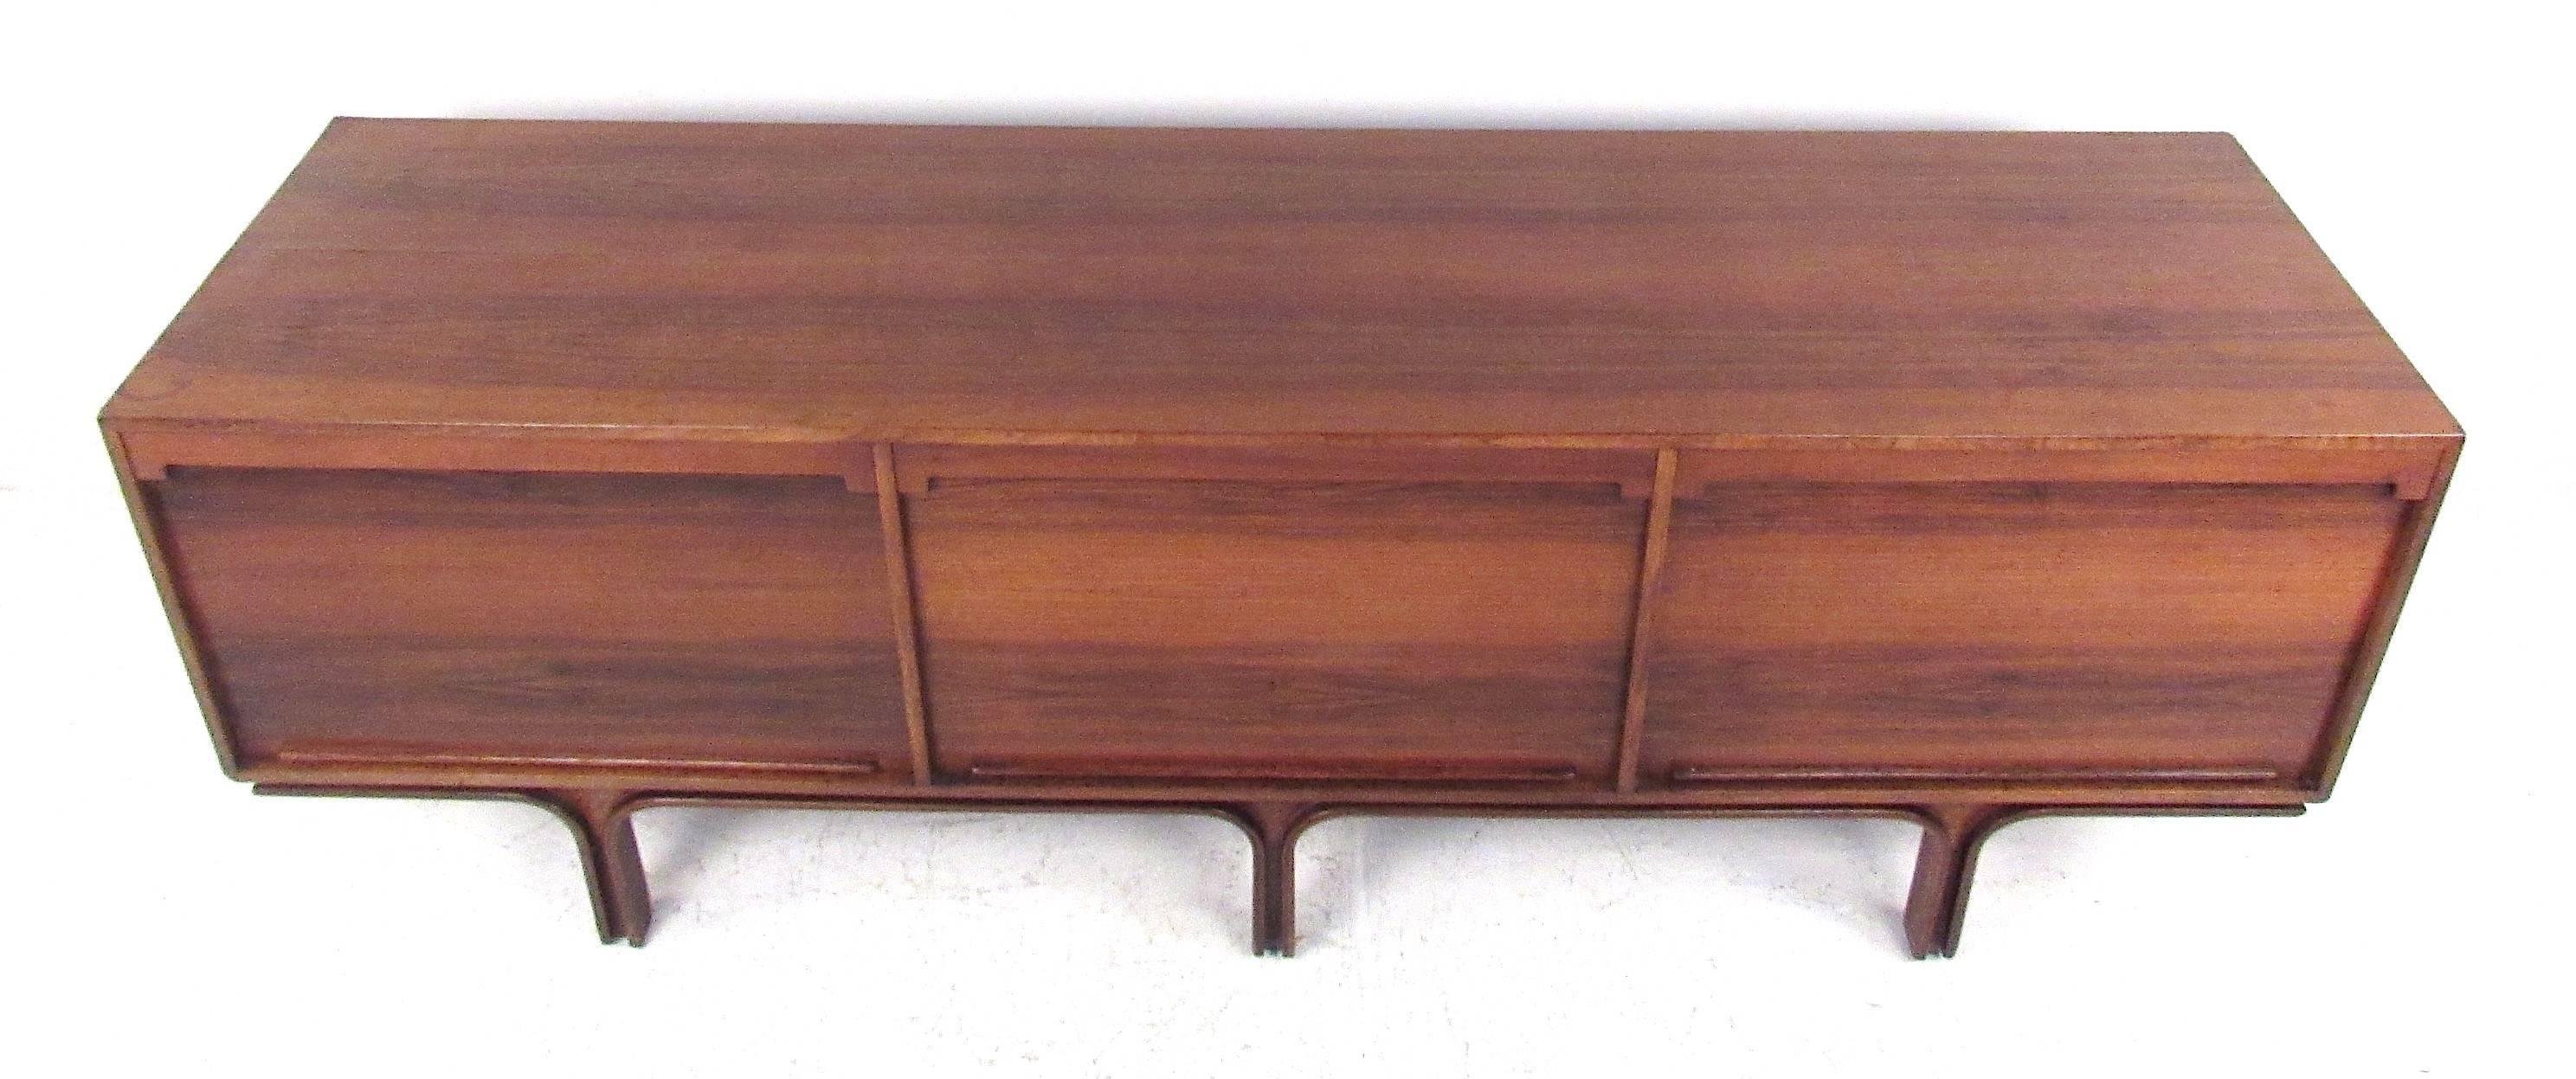 Rosewood sideboard with tambour doors designed by Gianfranco Frattini for Bernini. A well designed sideboard with three vertical tambour doors, a chest of drawers on one side and adjustable shelves in the other two. Please confirm item location (NY